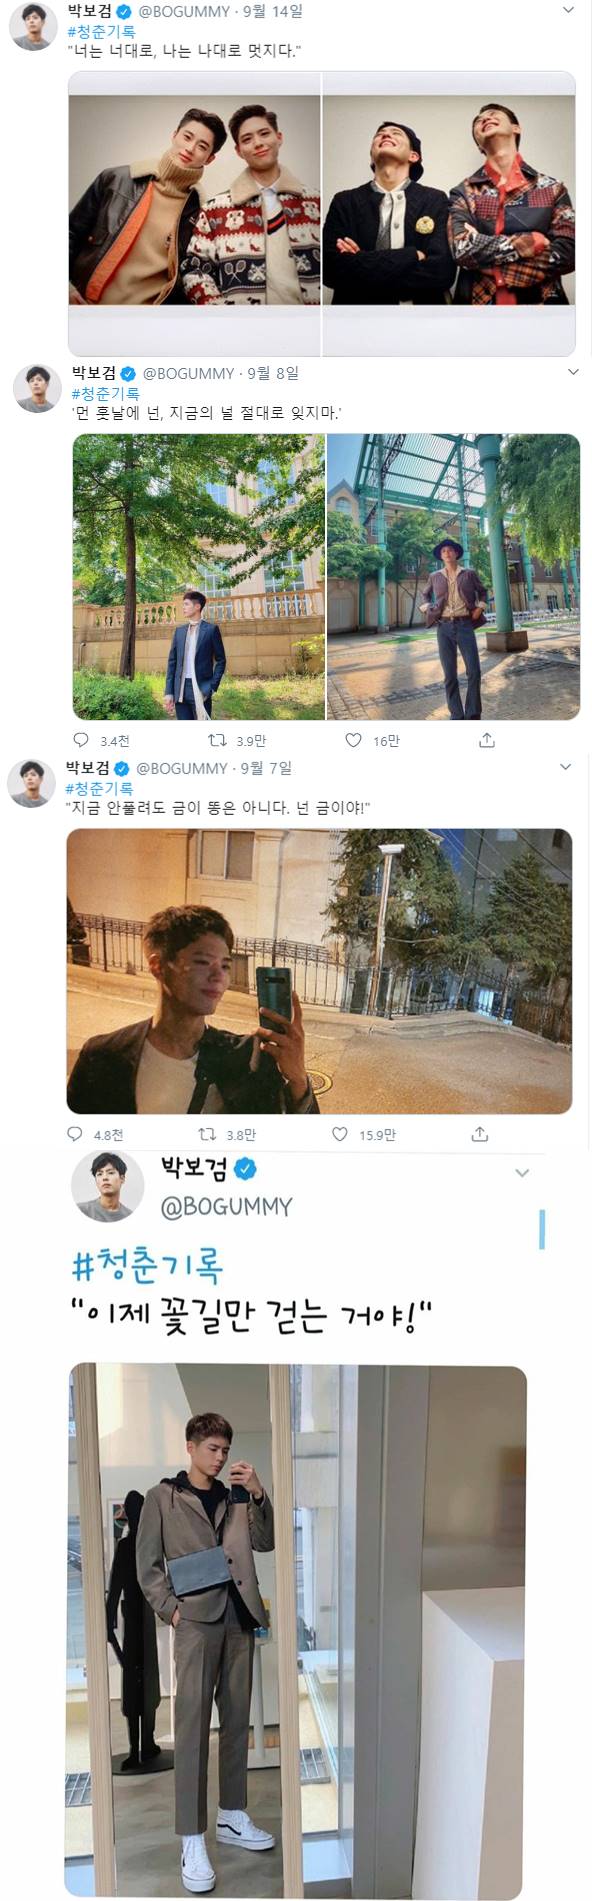 It is not an empty place for Actor Park Bo-gum who joined last month.His drama Record of Youth TV viewer ratings are high, and his SNS is still actively leading to post uploads.A new post has steadily been posted on Park Bo-gum Twitter, attracting attention.Even in the situation where SNS upload can not be done now, the post is continuously posted on Park Bo-gum SNS.Park Bo-gum, who joined the Navy Cultural Infantry on March 31, is currently receiving basic military training at the Navy Basic Military Education Team of the Navy Education Command in Jinhae-gu, Changwon, Gyeongsangnam-do.The SNS post mainly contains photos taken by Park Bo-gum at the time of the filming of Drama Record of Youth and comforting words cheering youth.Especially, #Record of Youth adds a hashtag, which seems to add to the meaning that Park Bo-gums youth is recorded.Some people have also said that it is interesting to connect with the world view of Drama because these words are actually ambassadors of Drama.Park Bo-gum is looking for an anime theater every week as an actor who is growing up in SNS on TVN Drama Record of Youth.However, every week on Monday, at 10 pm, when the Record of Youth broadcast ends, a post similar to the SNS of the role of the role in the actual Park Bo-gum SNS is posted.The broadcaster uploads Park Bo-gums SNS, and sees responsibility as a leading actor.It is an interpretation that the SNS post that matches the intention of the drama plan showed authenticity about the work.Park Bo-gum is uploading the post at the end of the Record of Youth broadcast and adding the ambassador of the broadcast that day.In fact, Record of Youth is a drama that depicts the growth Record of Youth people who try to achieve dreams and love without despairing on the wall of reality. It is in line with Park Bo-gum SNS, which contains the words of support for youth.Park Bo-gums fan love is also noted: He is famous for managing SNS directly without the help of his agency.It is observed that he has already booked posts before the enlistment, which he usually used as a post booking function, in time for the end of the drama.It will be presented as a gift from Park Bo-gum for fans who will be sorry for the Bai Qi (Bai Qi due to the army).In this way, the vainness of Park Bo-gum in Bai Qi seems to be not much to feel.Moreover, Record of Youth started at the top of TV viewer ratings among TVNs monthly dramas from the first broadcast, and not only renews its own top TV viewer ratings for each broadcast, but also keeps the top TV viewer ratings in the same time zone.As much as the development of Drama, Park Bo-gum SNS is expected to continue to attract attention.=